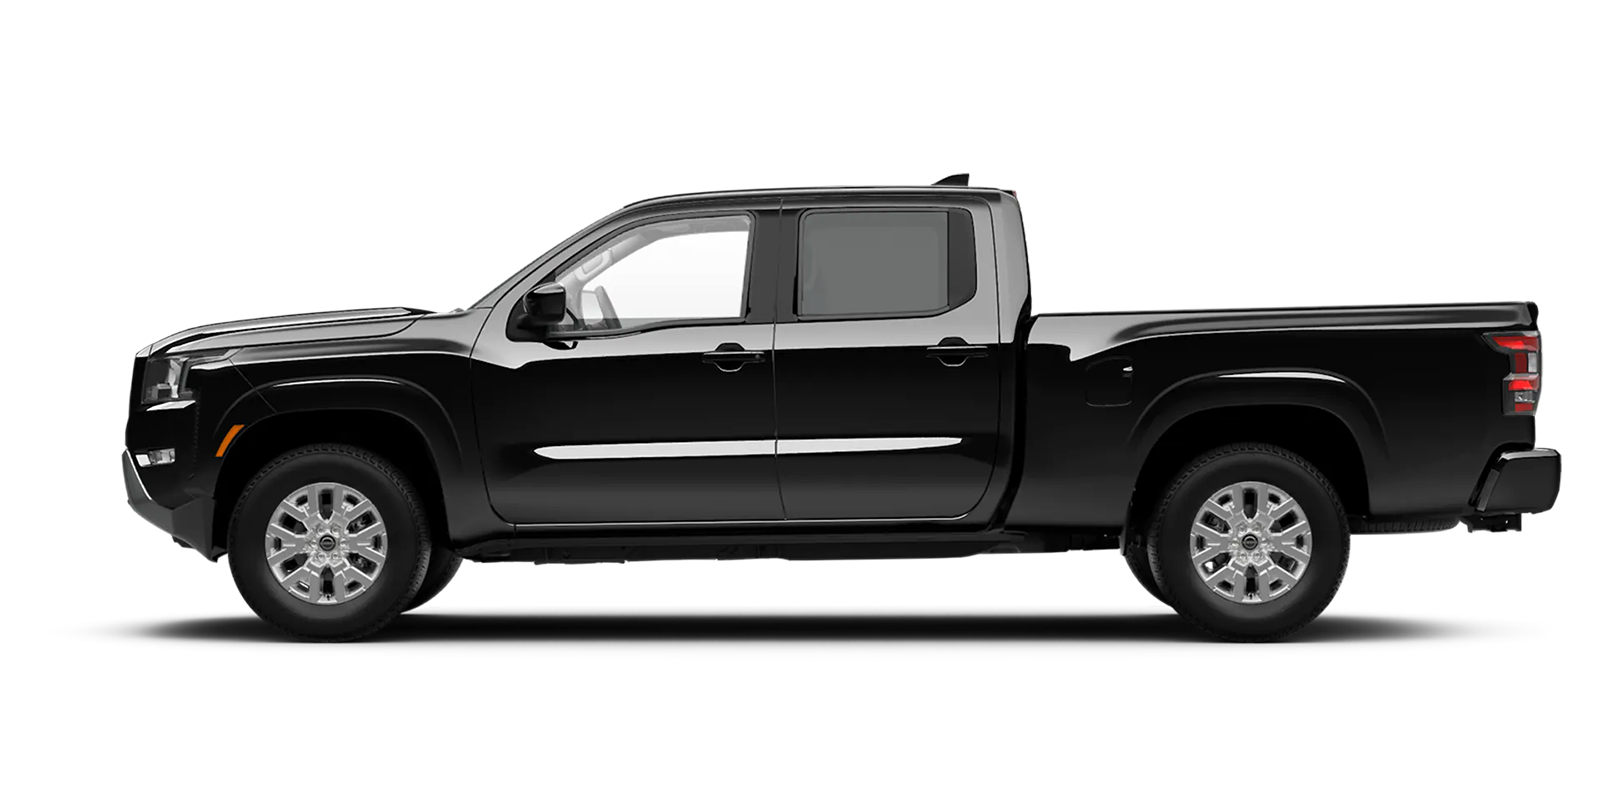 2022 Frontier Crew Cab Long Bed SV 4x2 in Super Black | Nissan of Pittsfield in Pittsfield MA